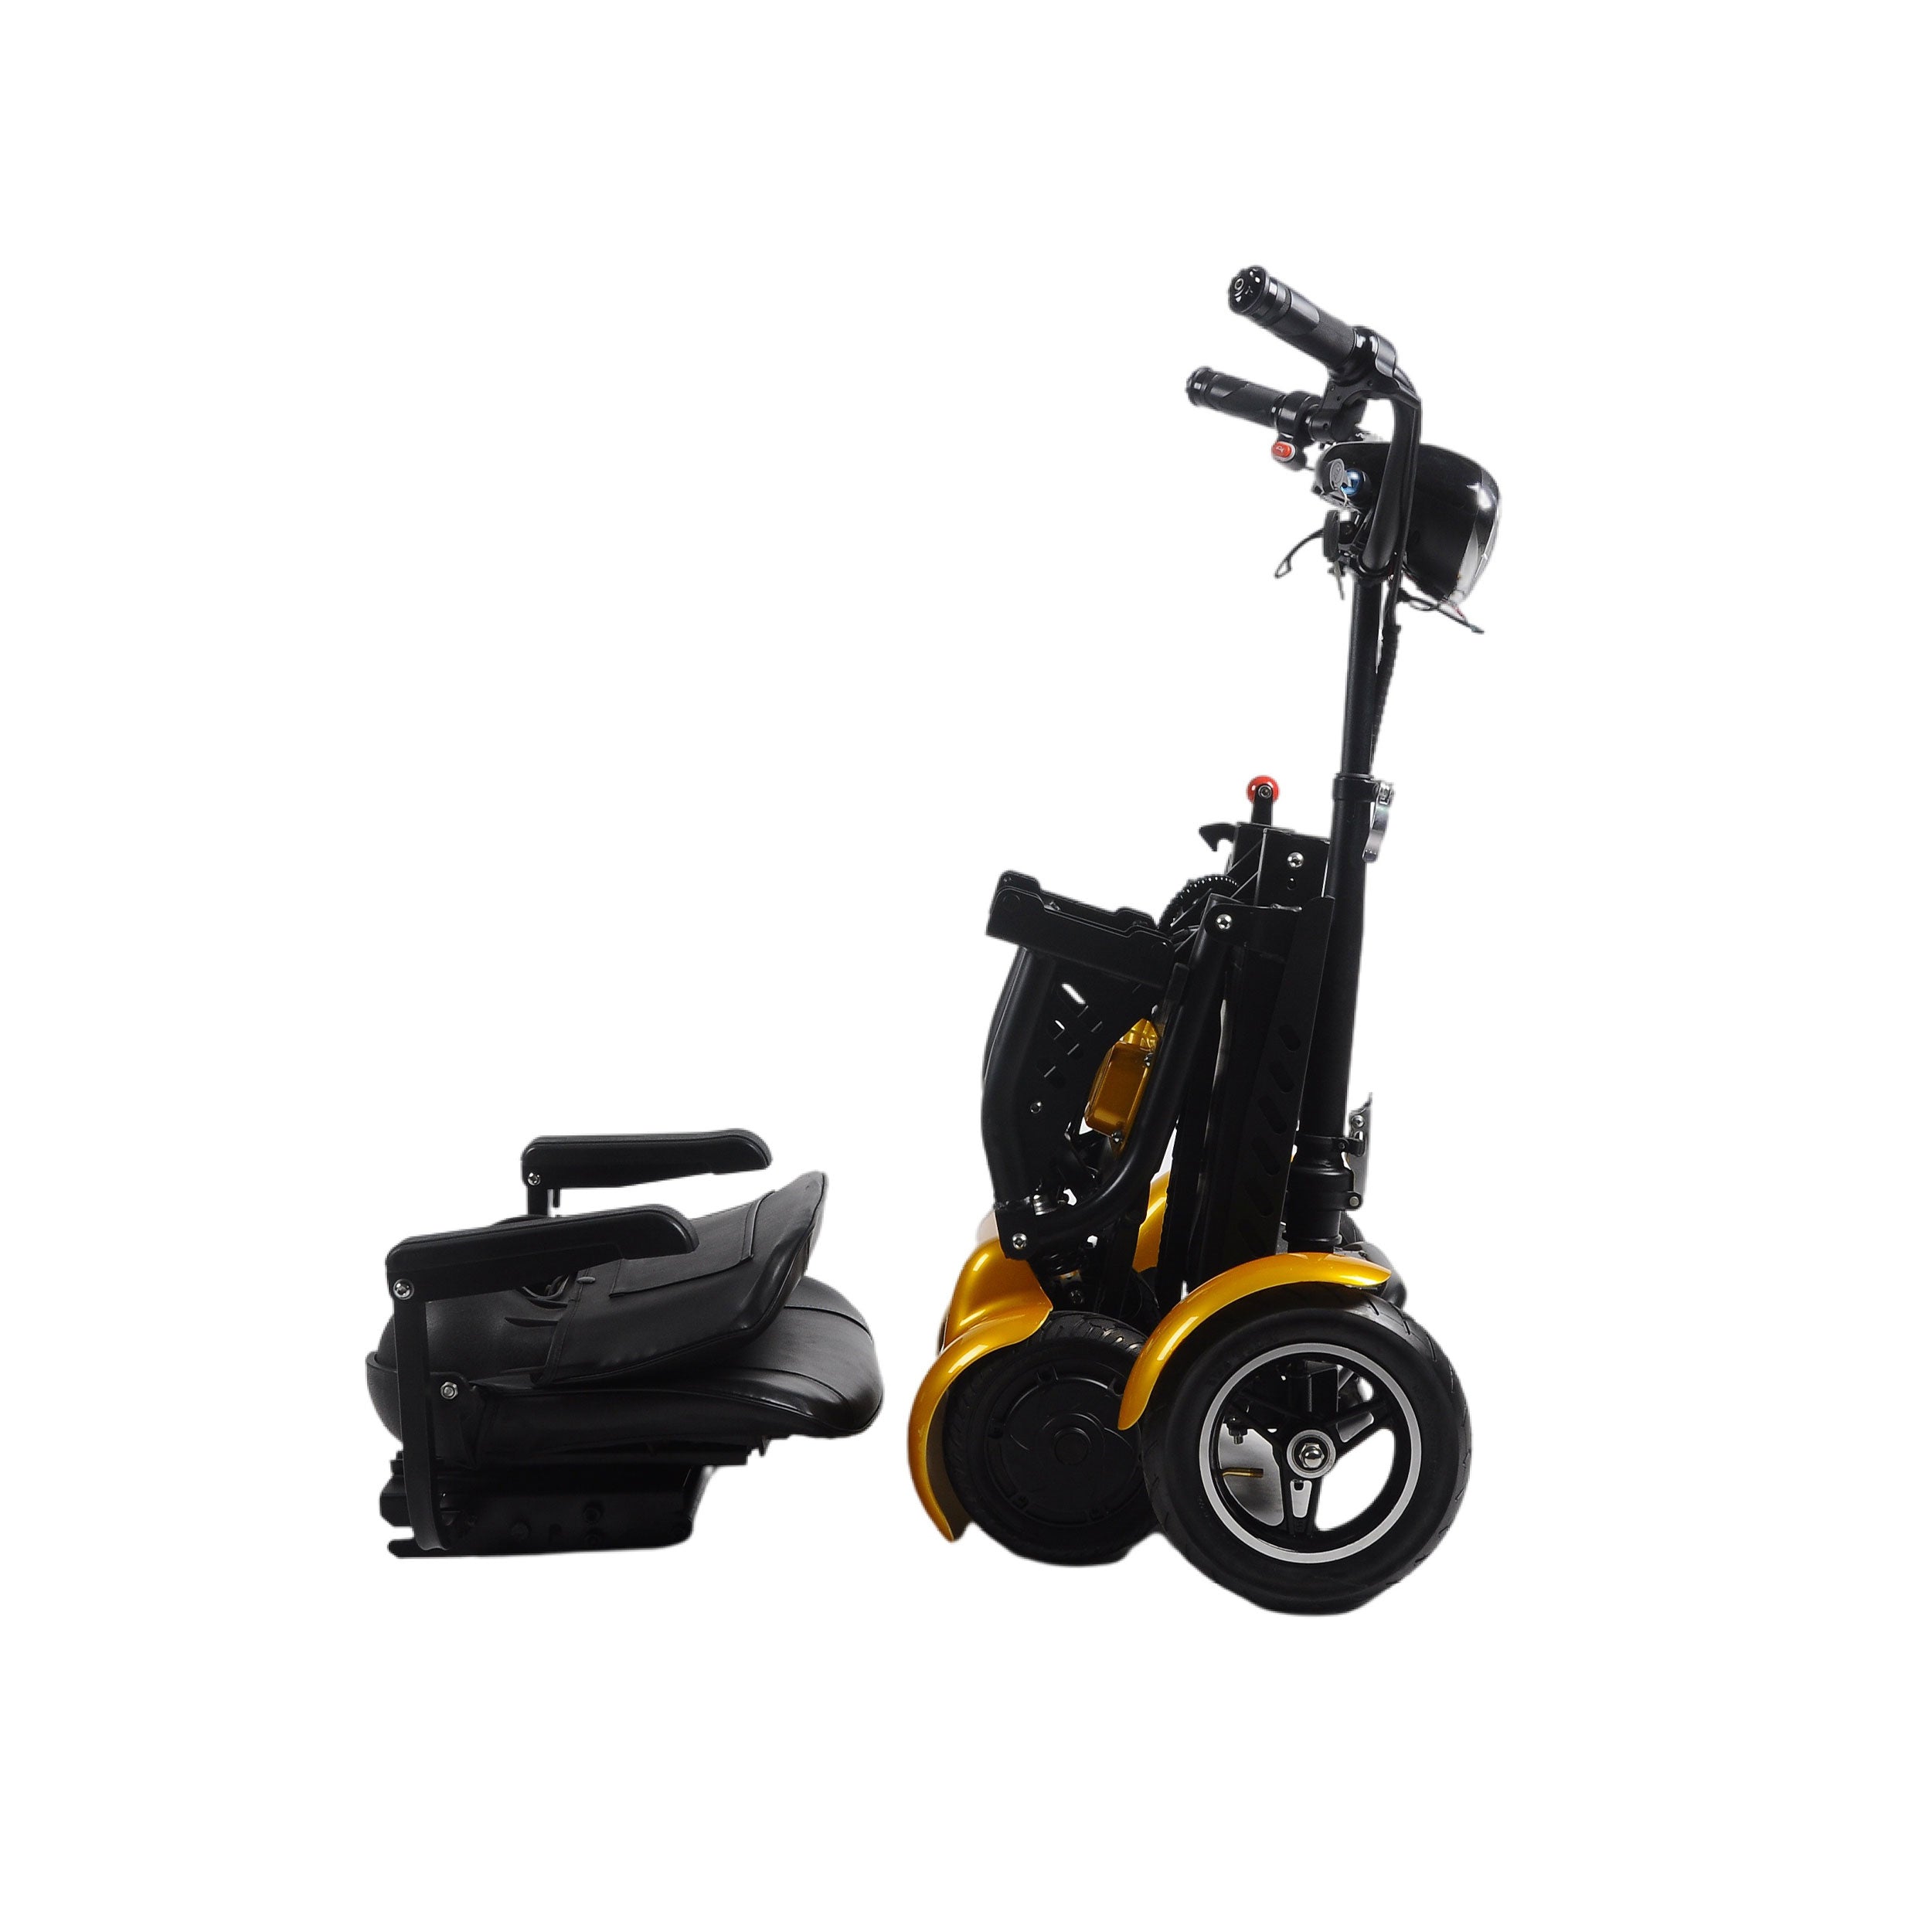 Rubicon medical scooter